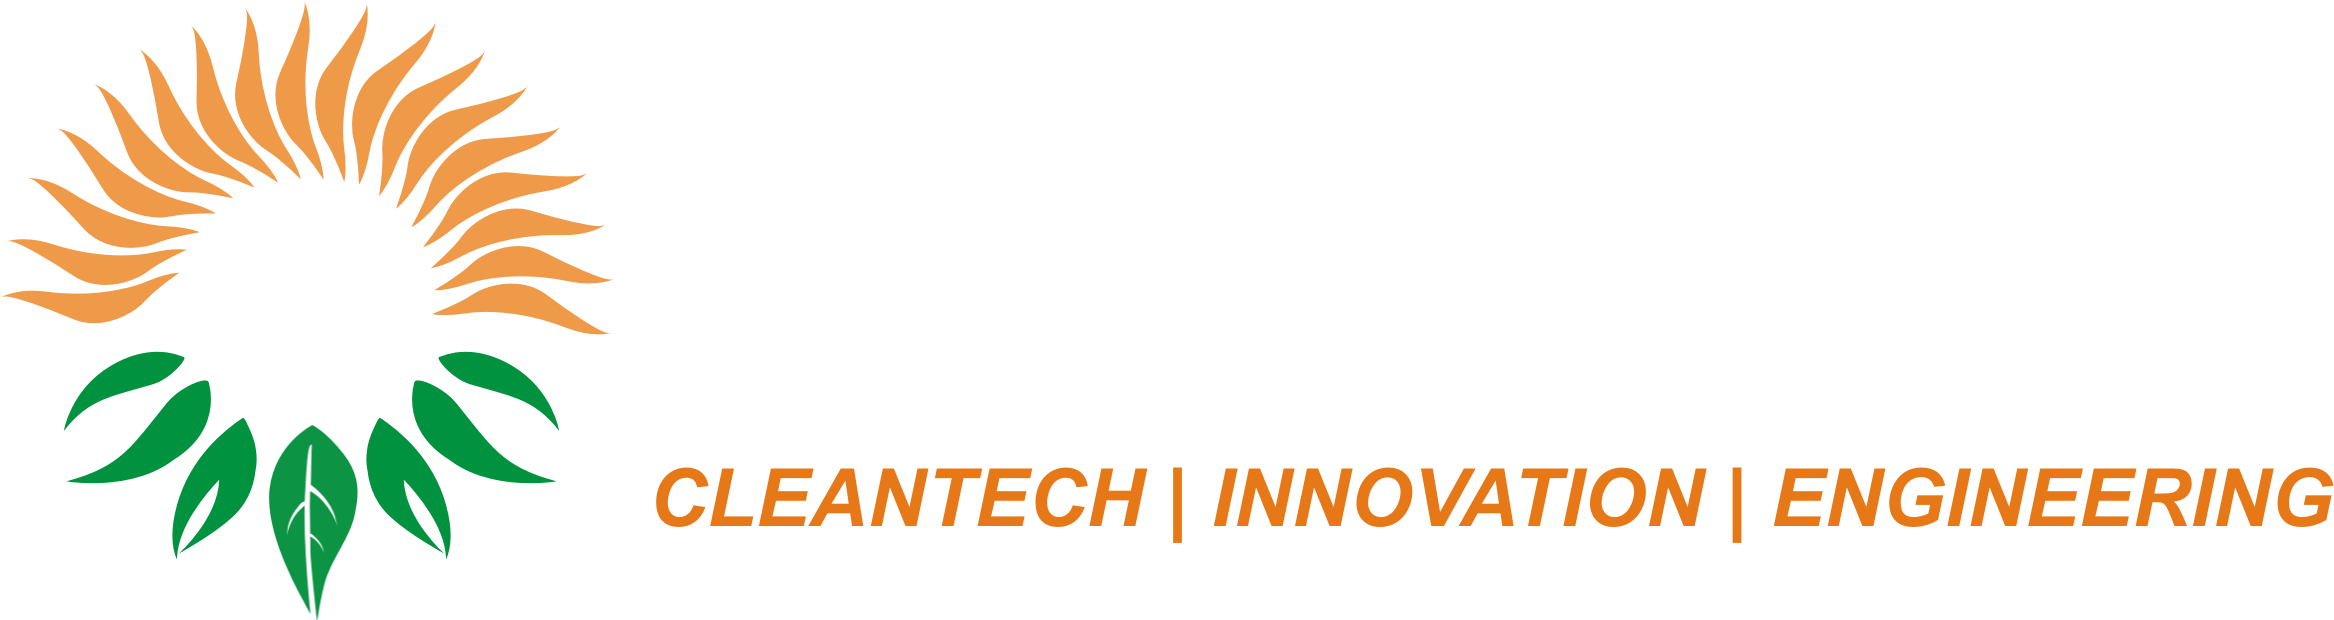 Organic Recycling Systems SME IPO Detail